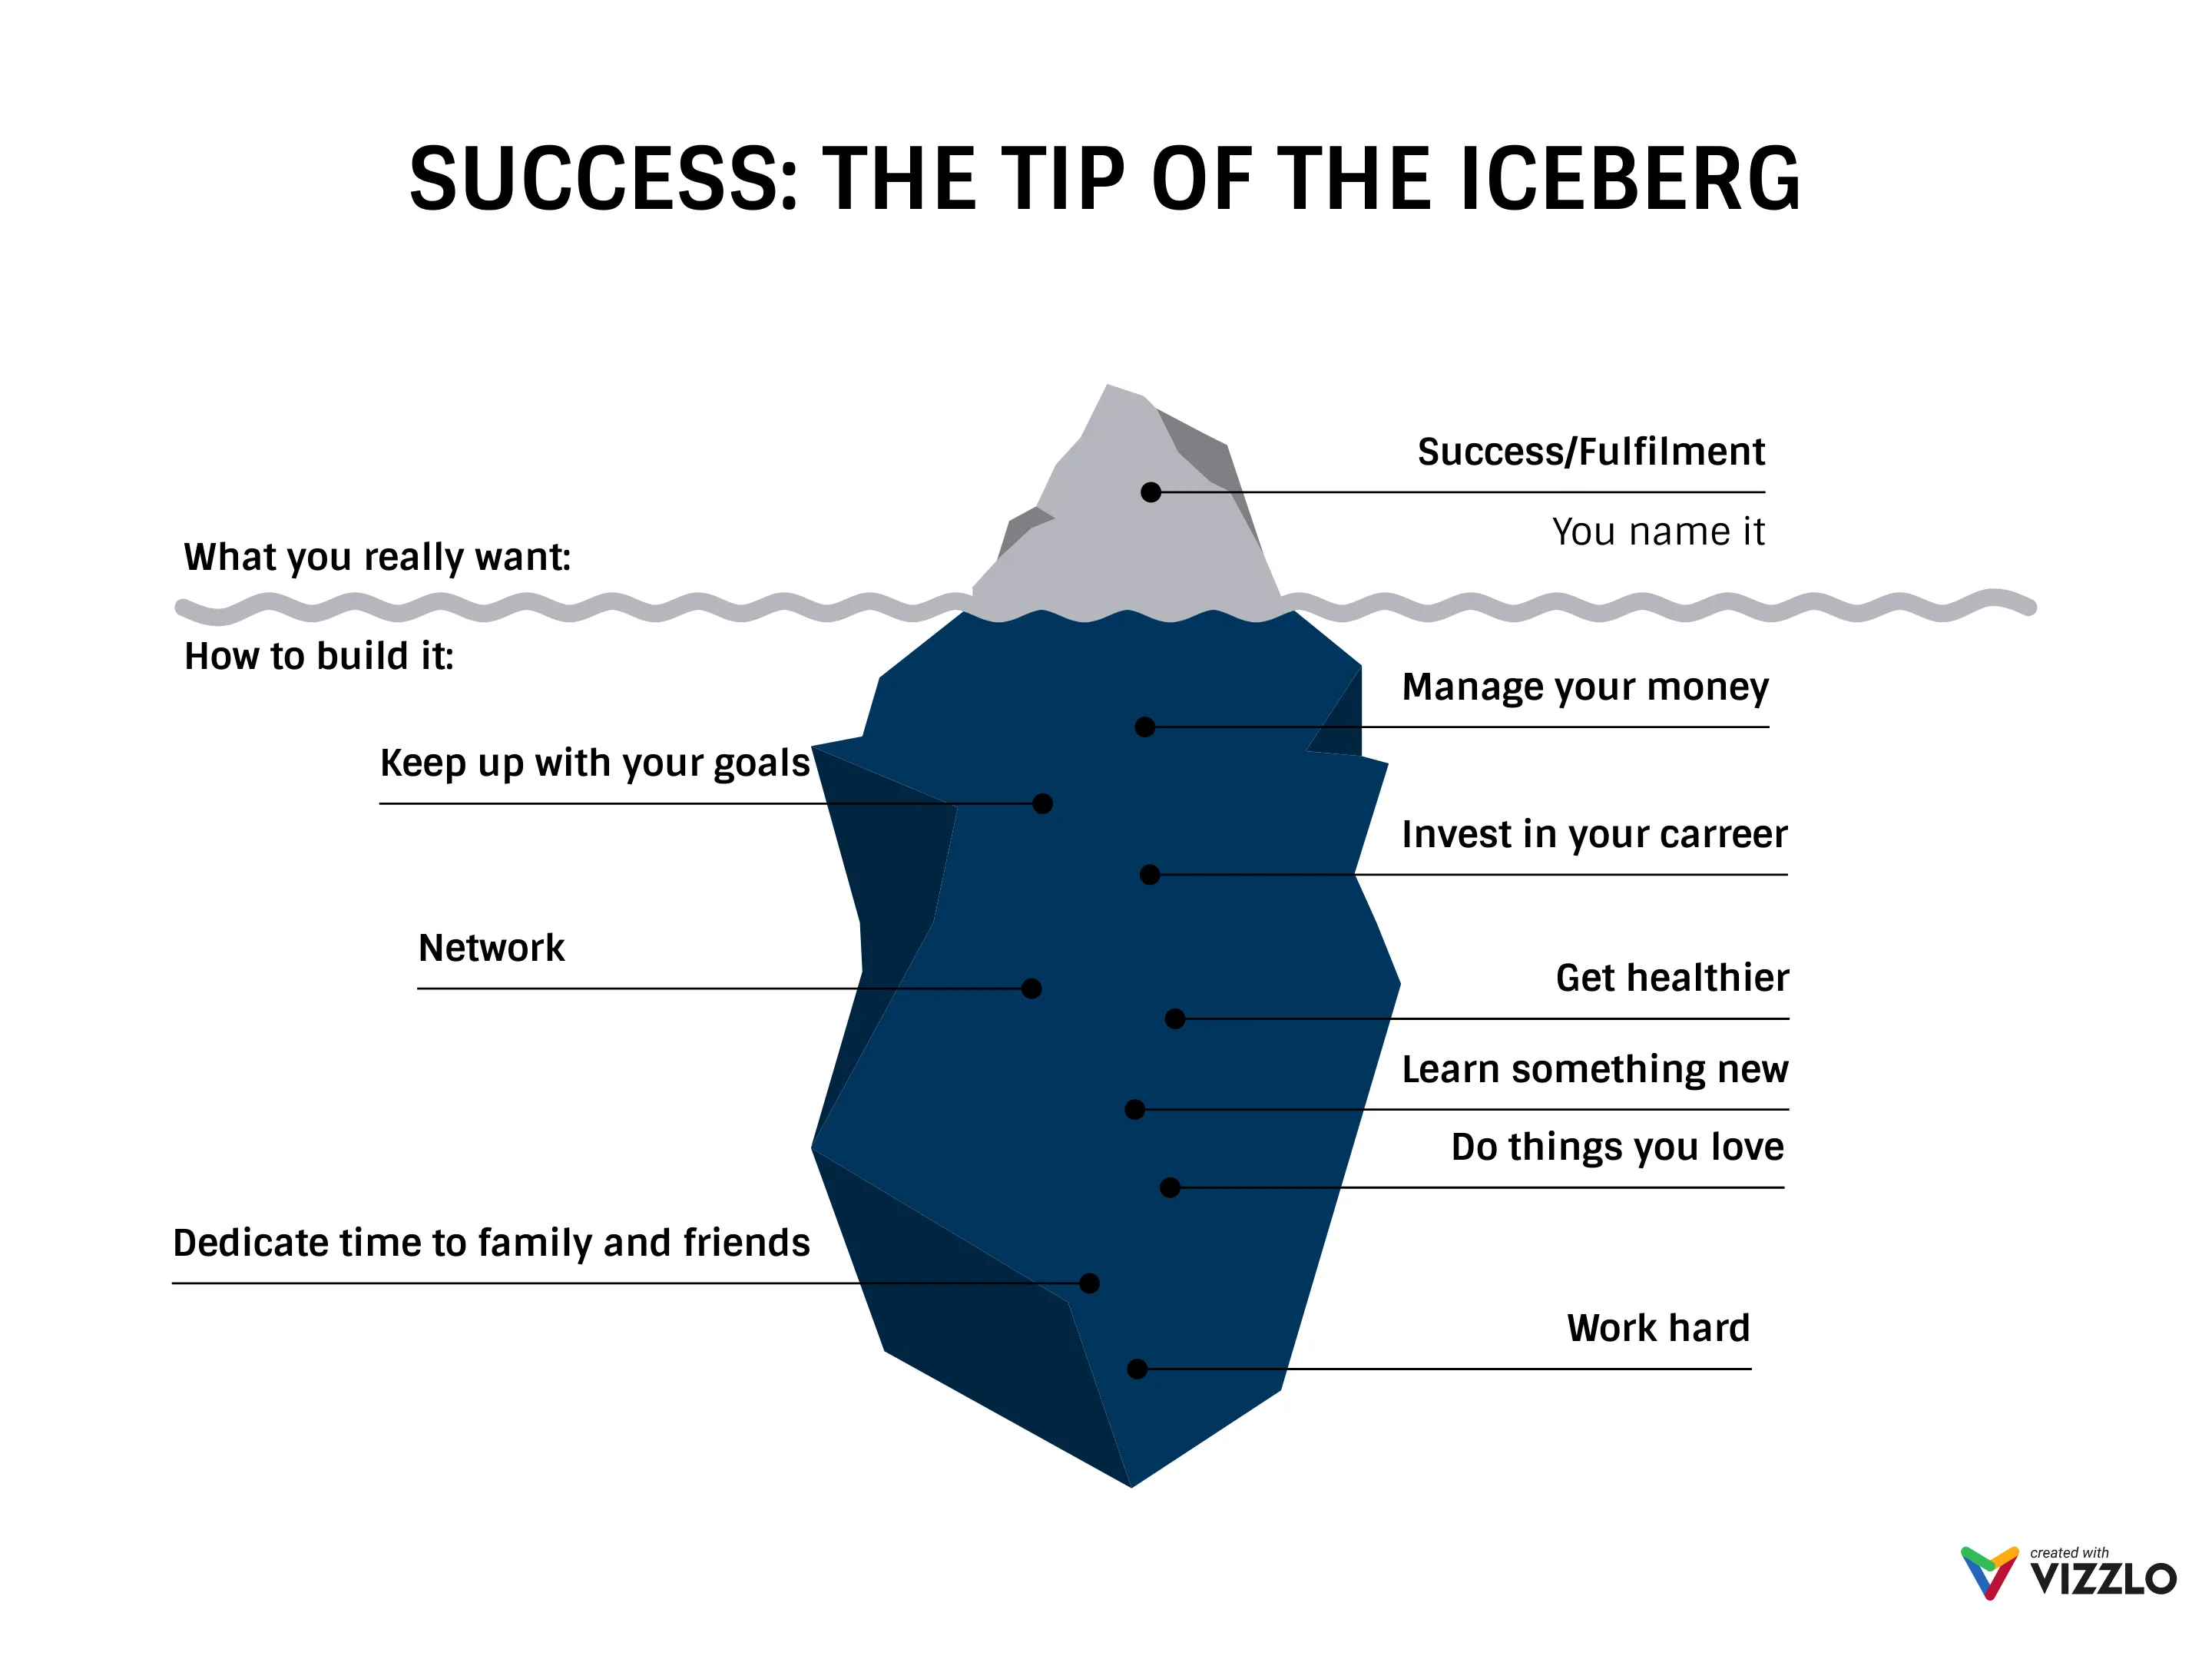 SUCCESS: THE TIP OF THE ICEBERG